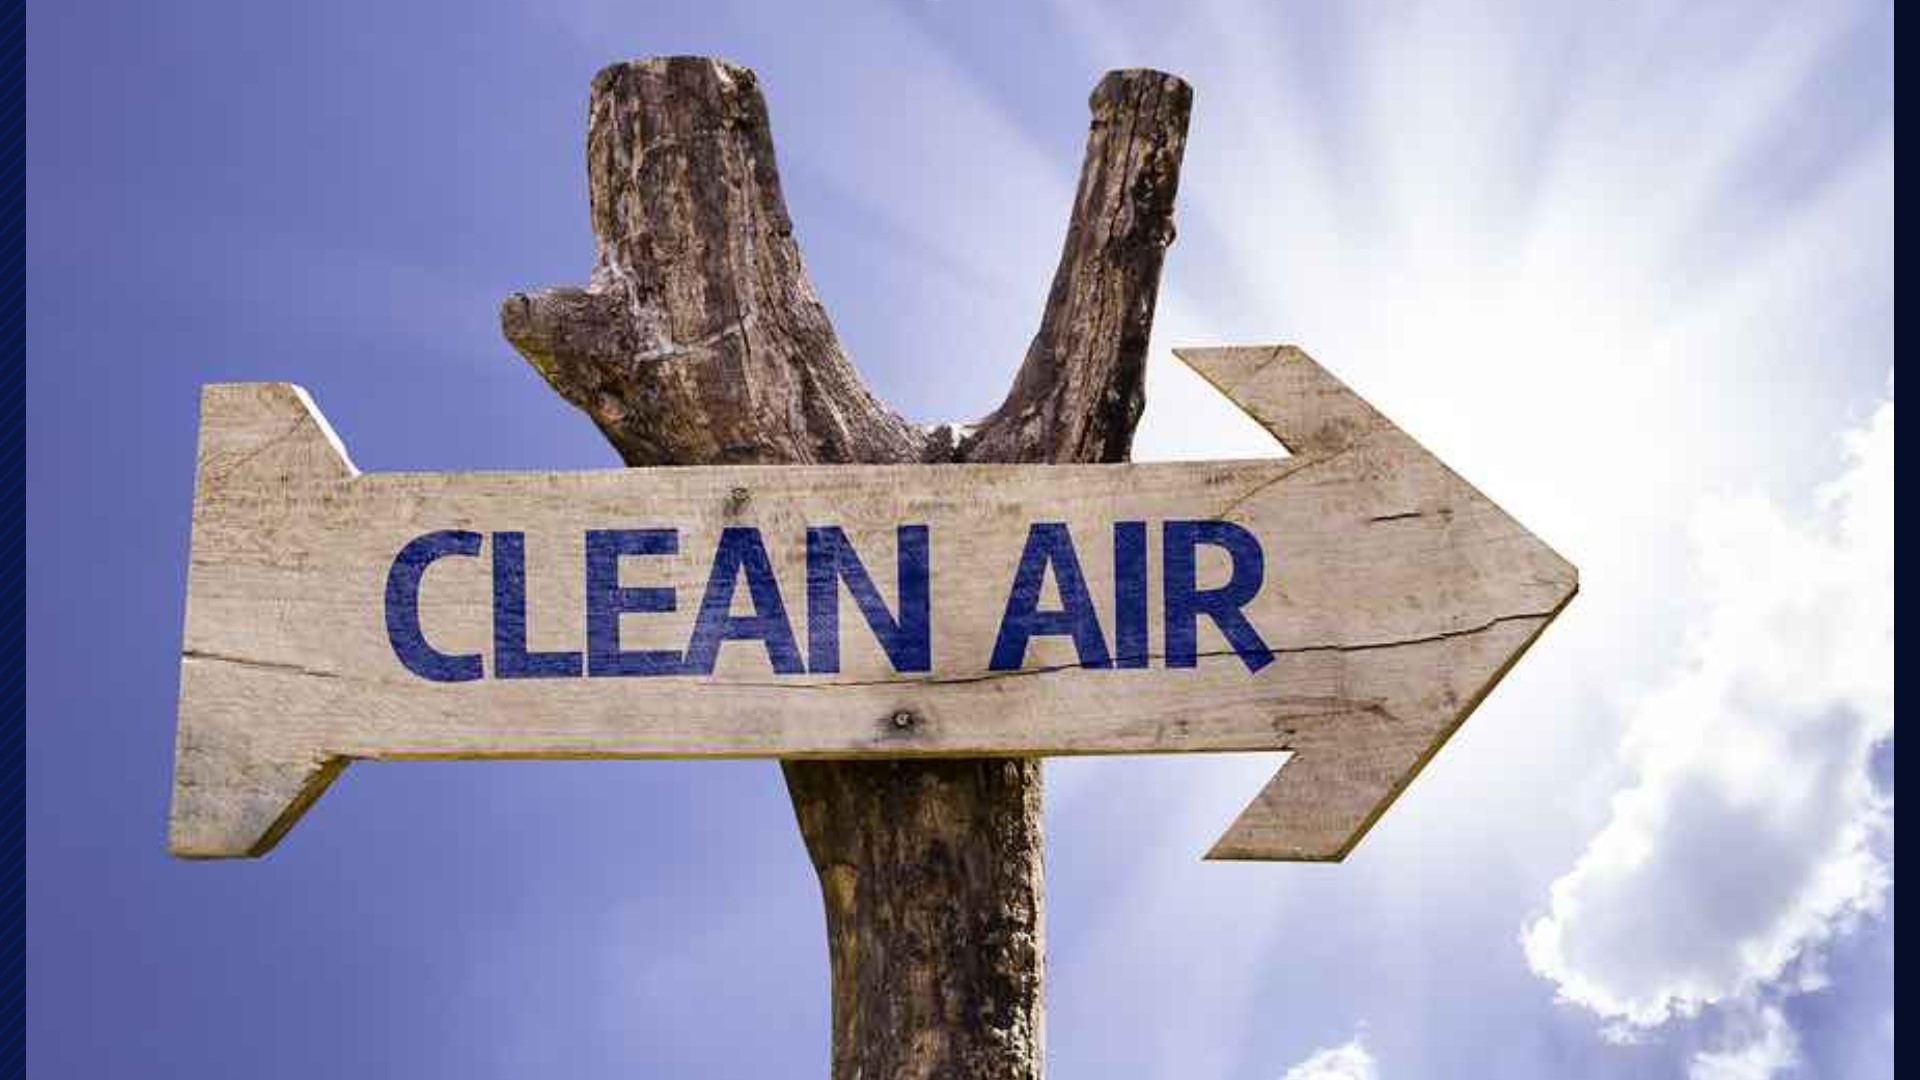 A Clean Air Action Day is called when certain air pollutants are forecast to reach unhealthy levels. On these days, the public is asked to take voluntary actions like deferring lawn mowing and limiting car usage to reduce emissions and protect their health.